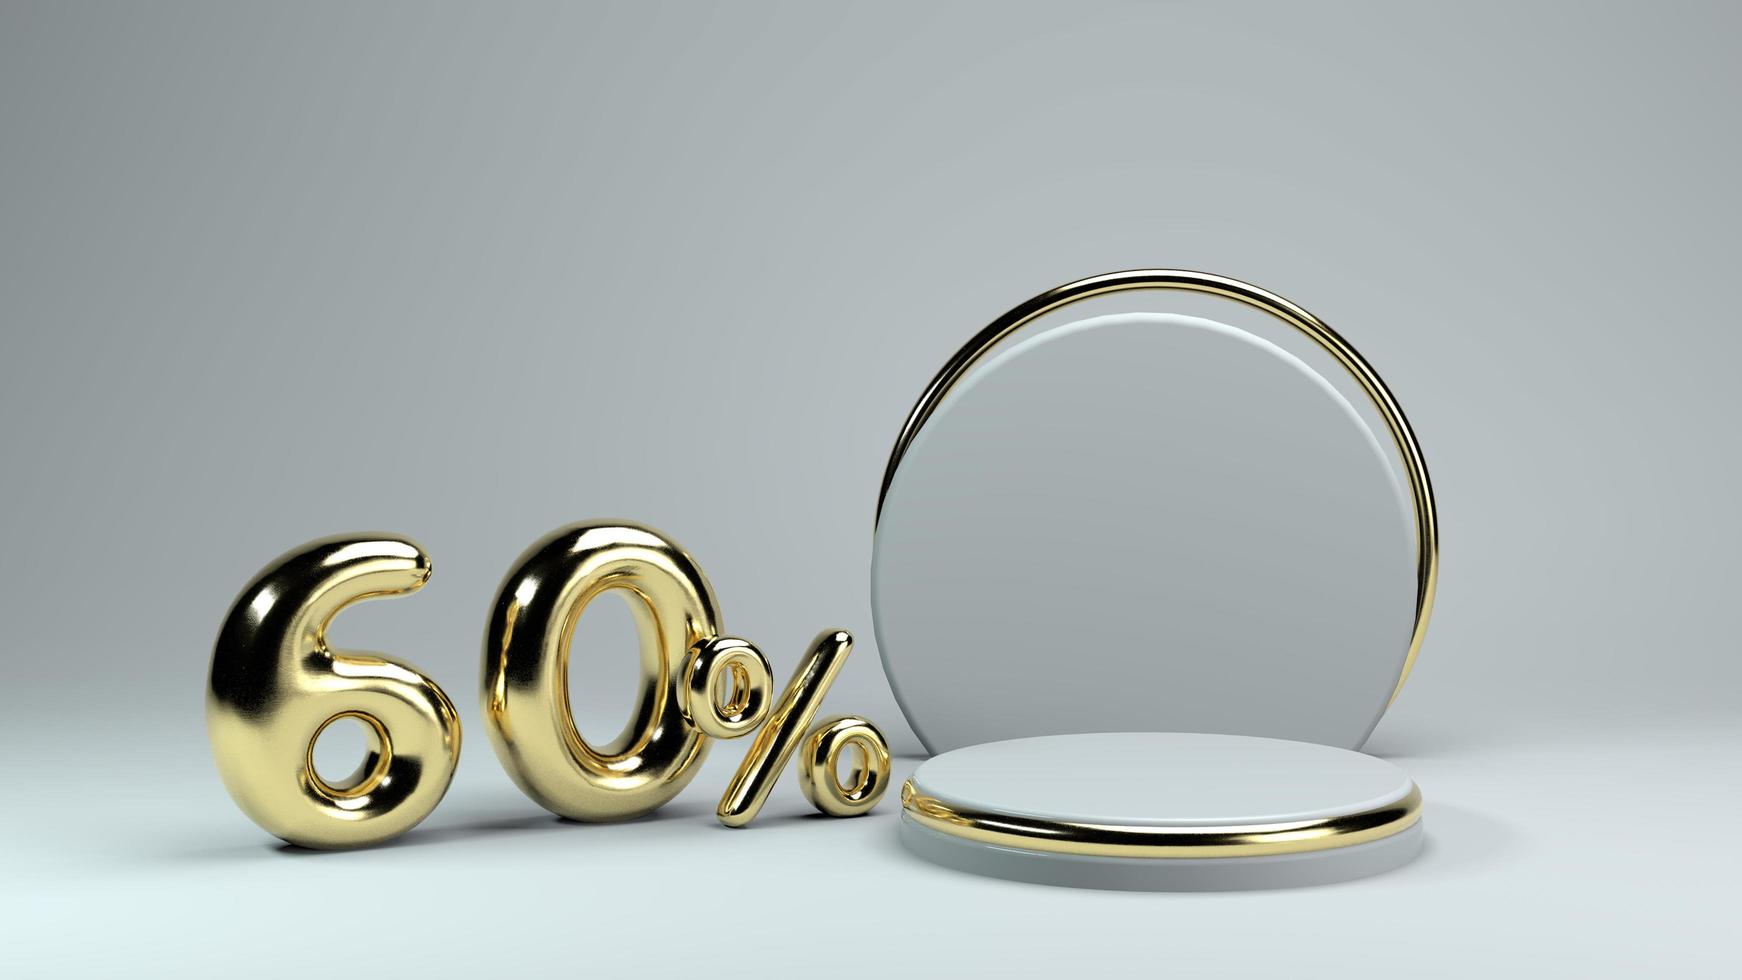 Sale Promotion 60 percent off with 3D Podium for product presentation photo